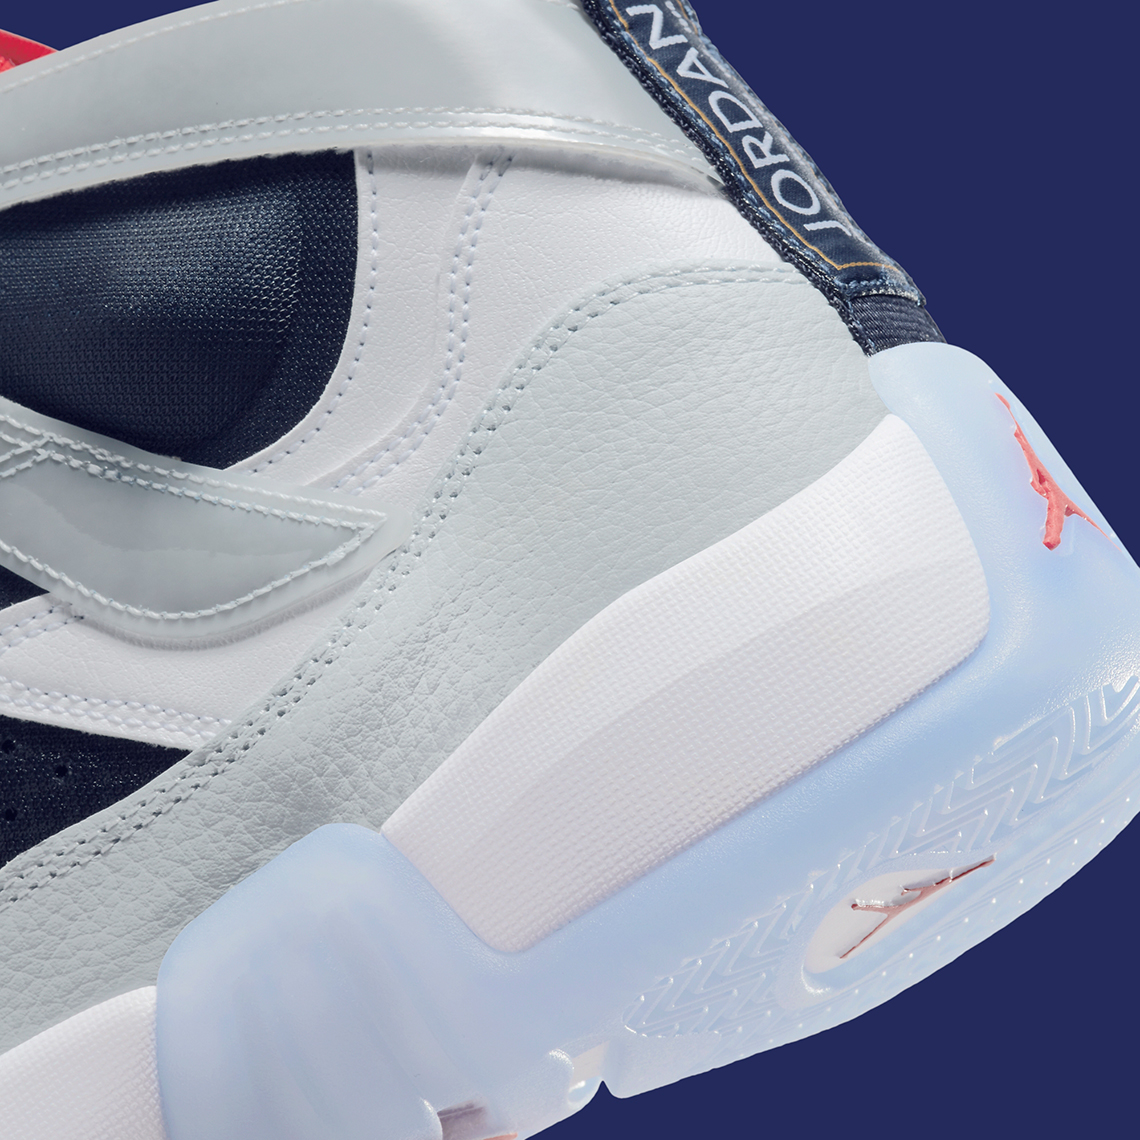 Where To Buy The Long-Awaited Solefly x Air jordan the 1 Low Olympic Do1925 101 7